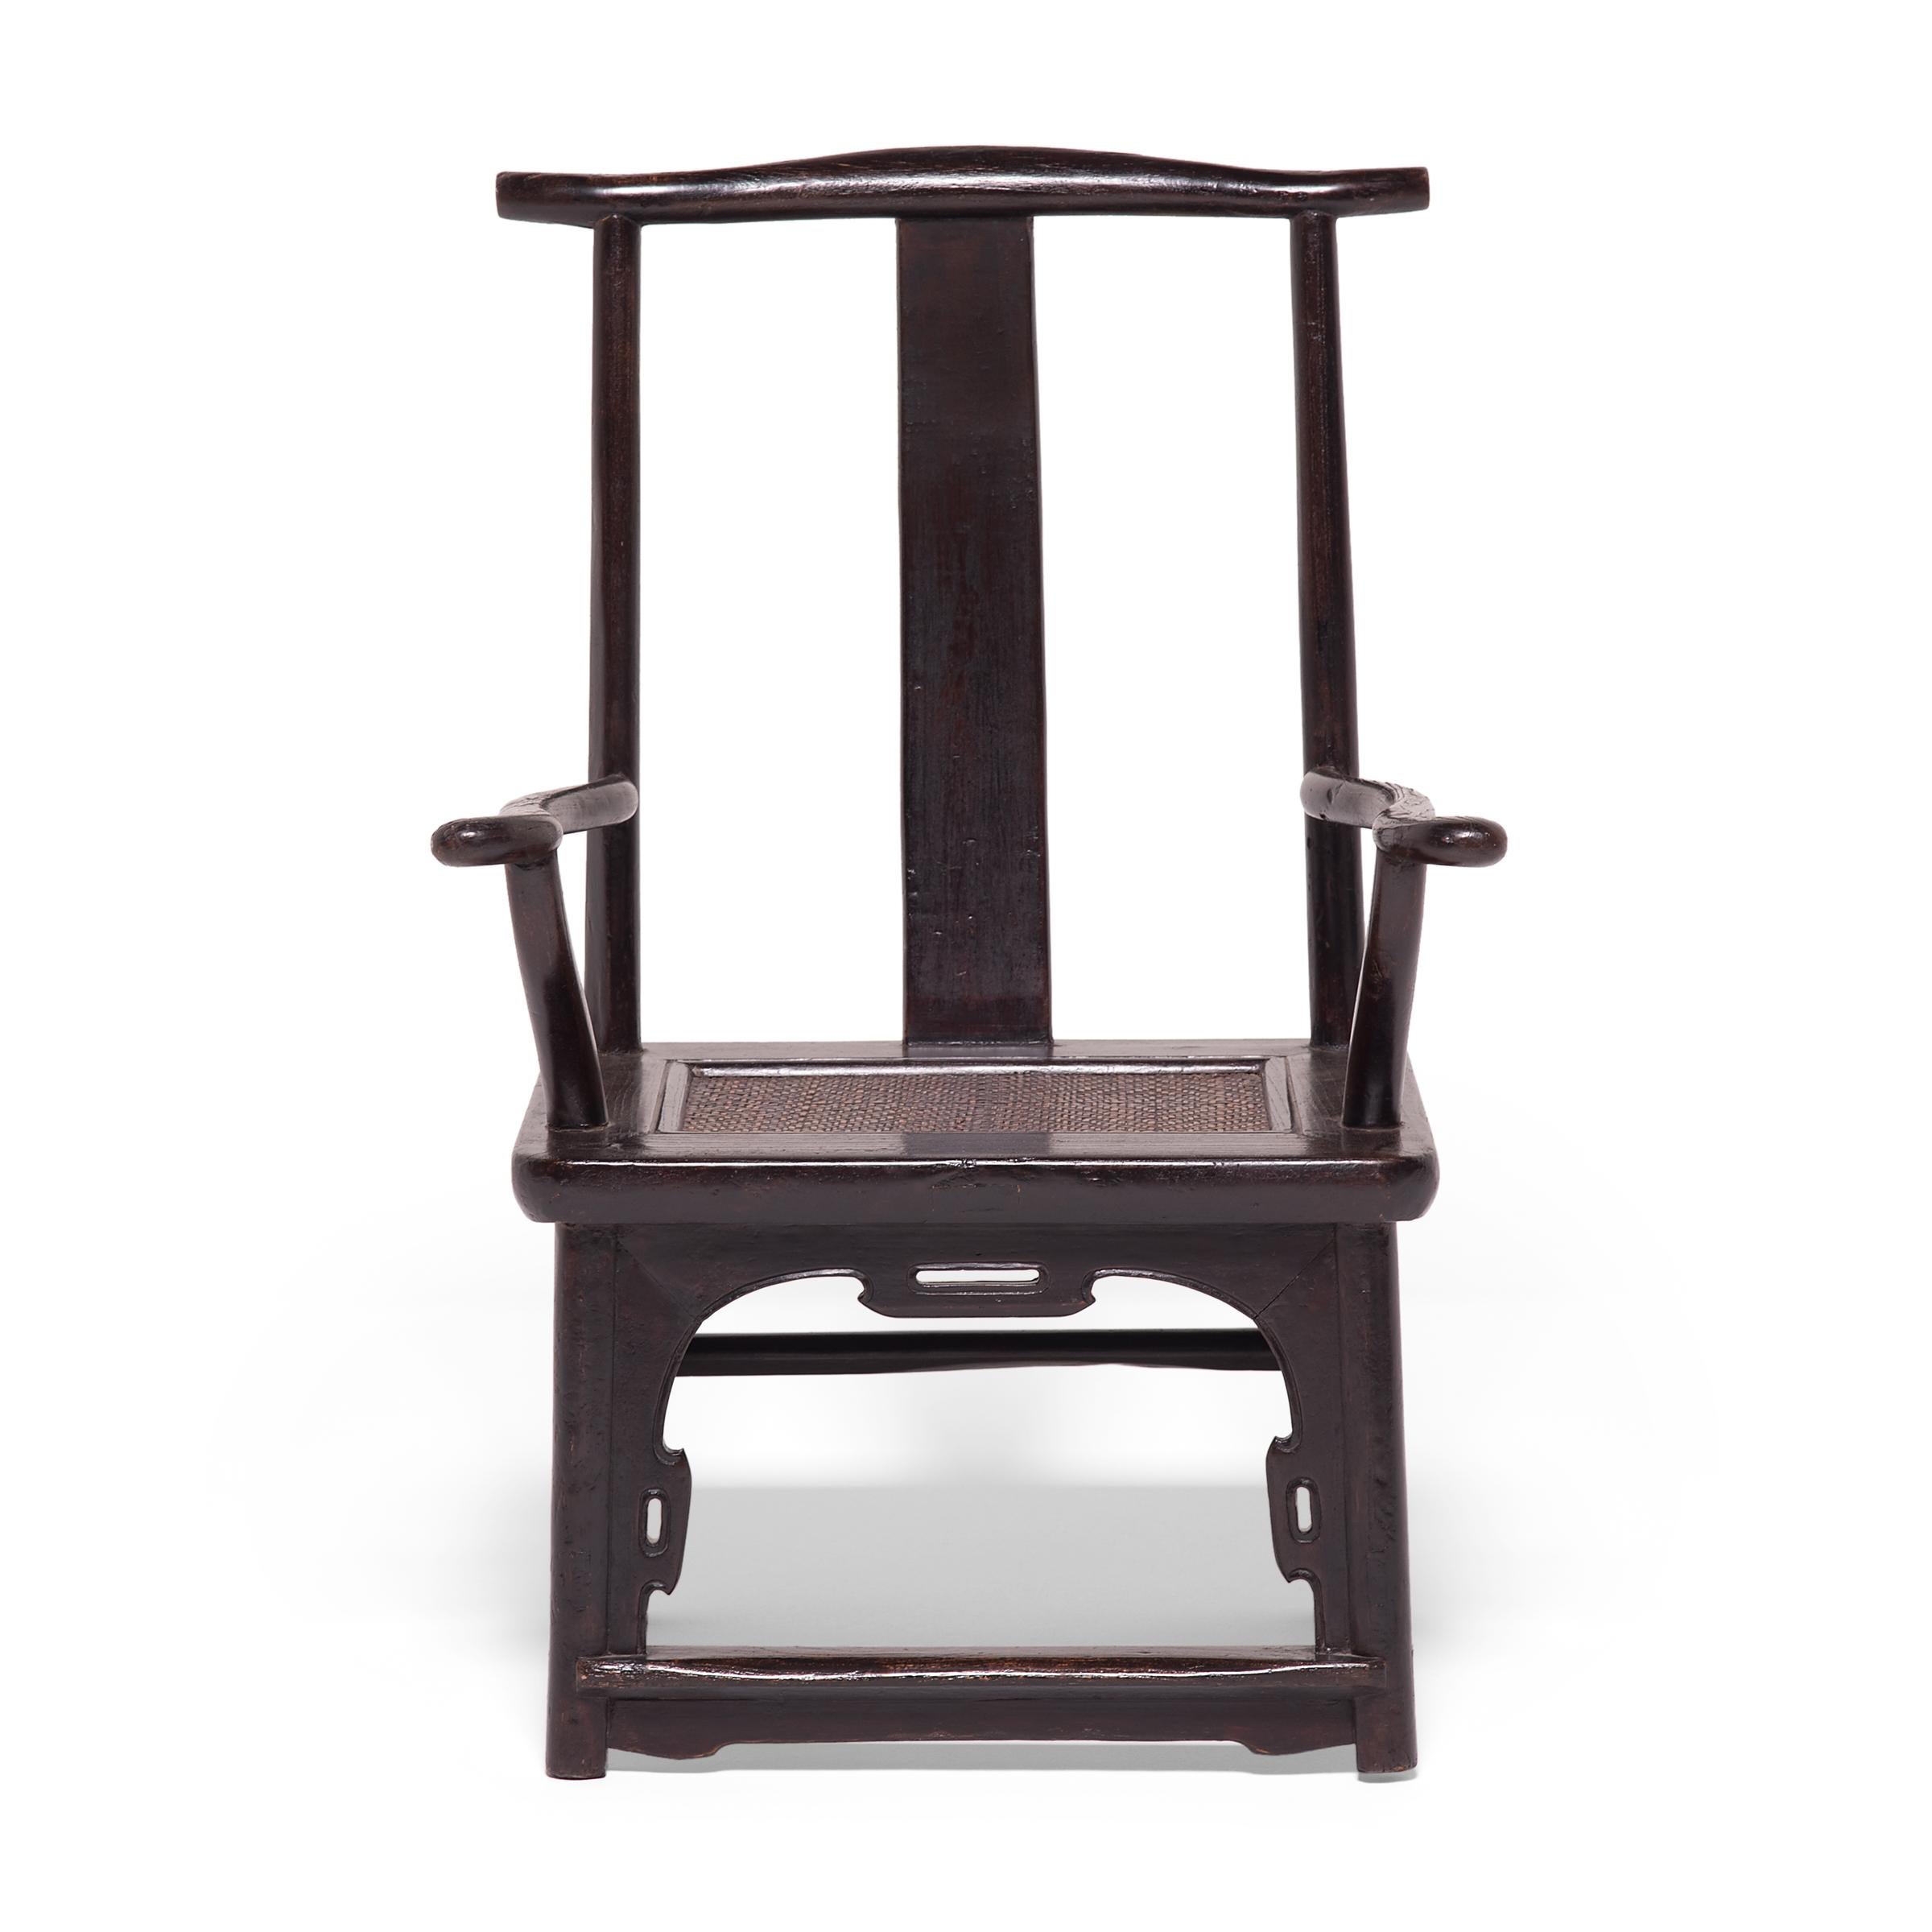 Unusual for its small scale, this pair of 19th century tall back chairs are diminutive updates on the classic yoke-back armchair popular since the Song dynasty. Also referred to as official’s hat chairs, the chair mimics the brimmed hats of